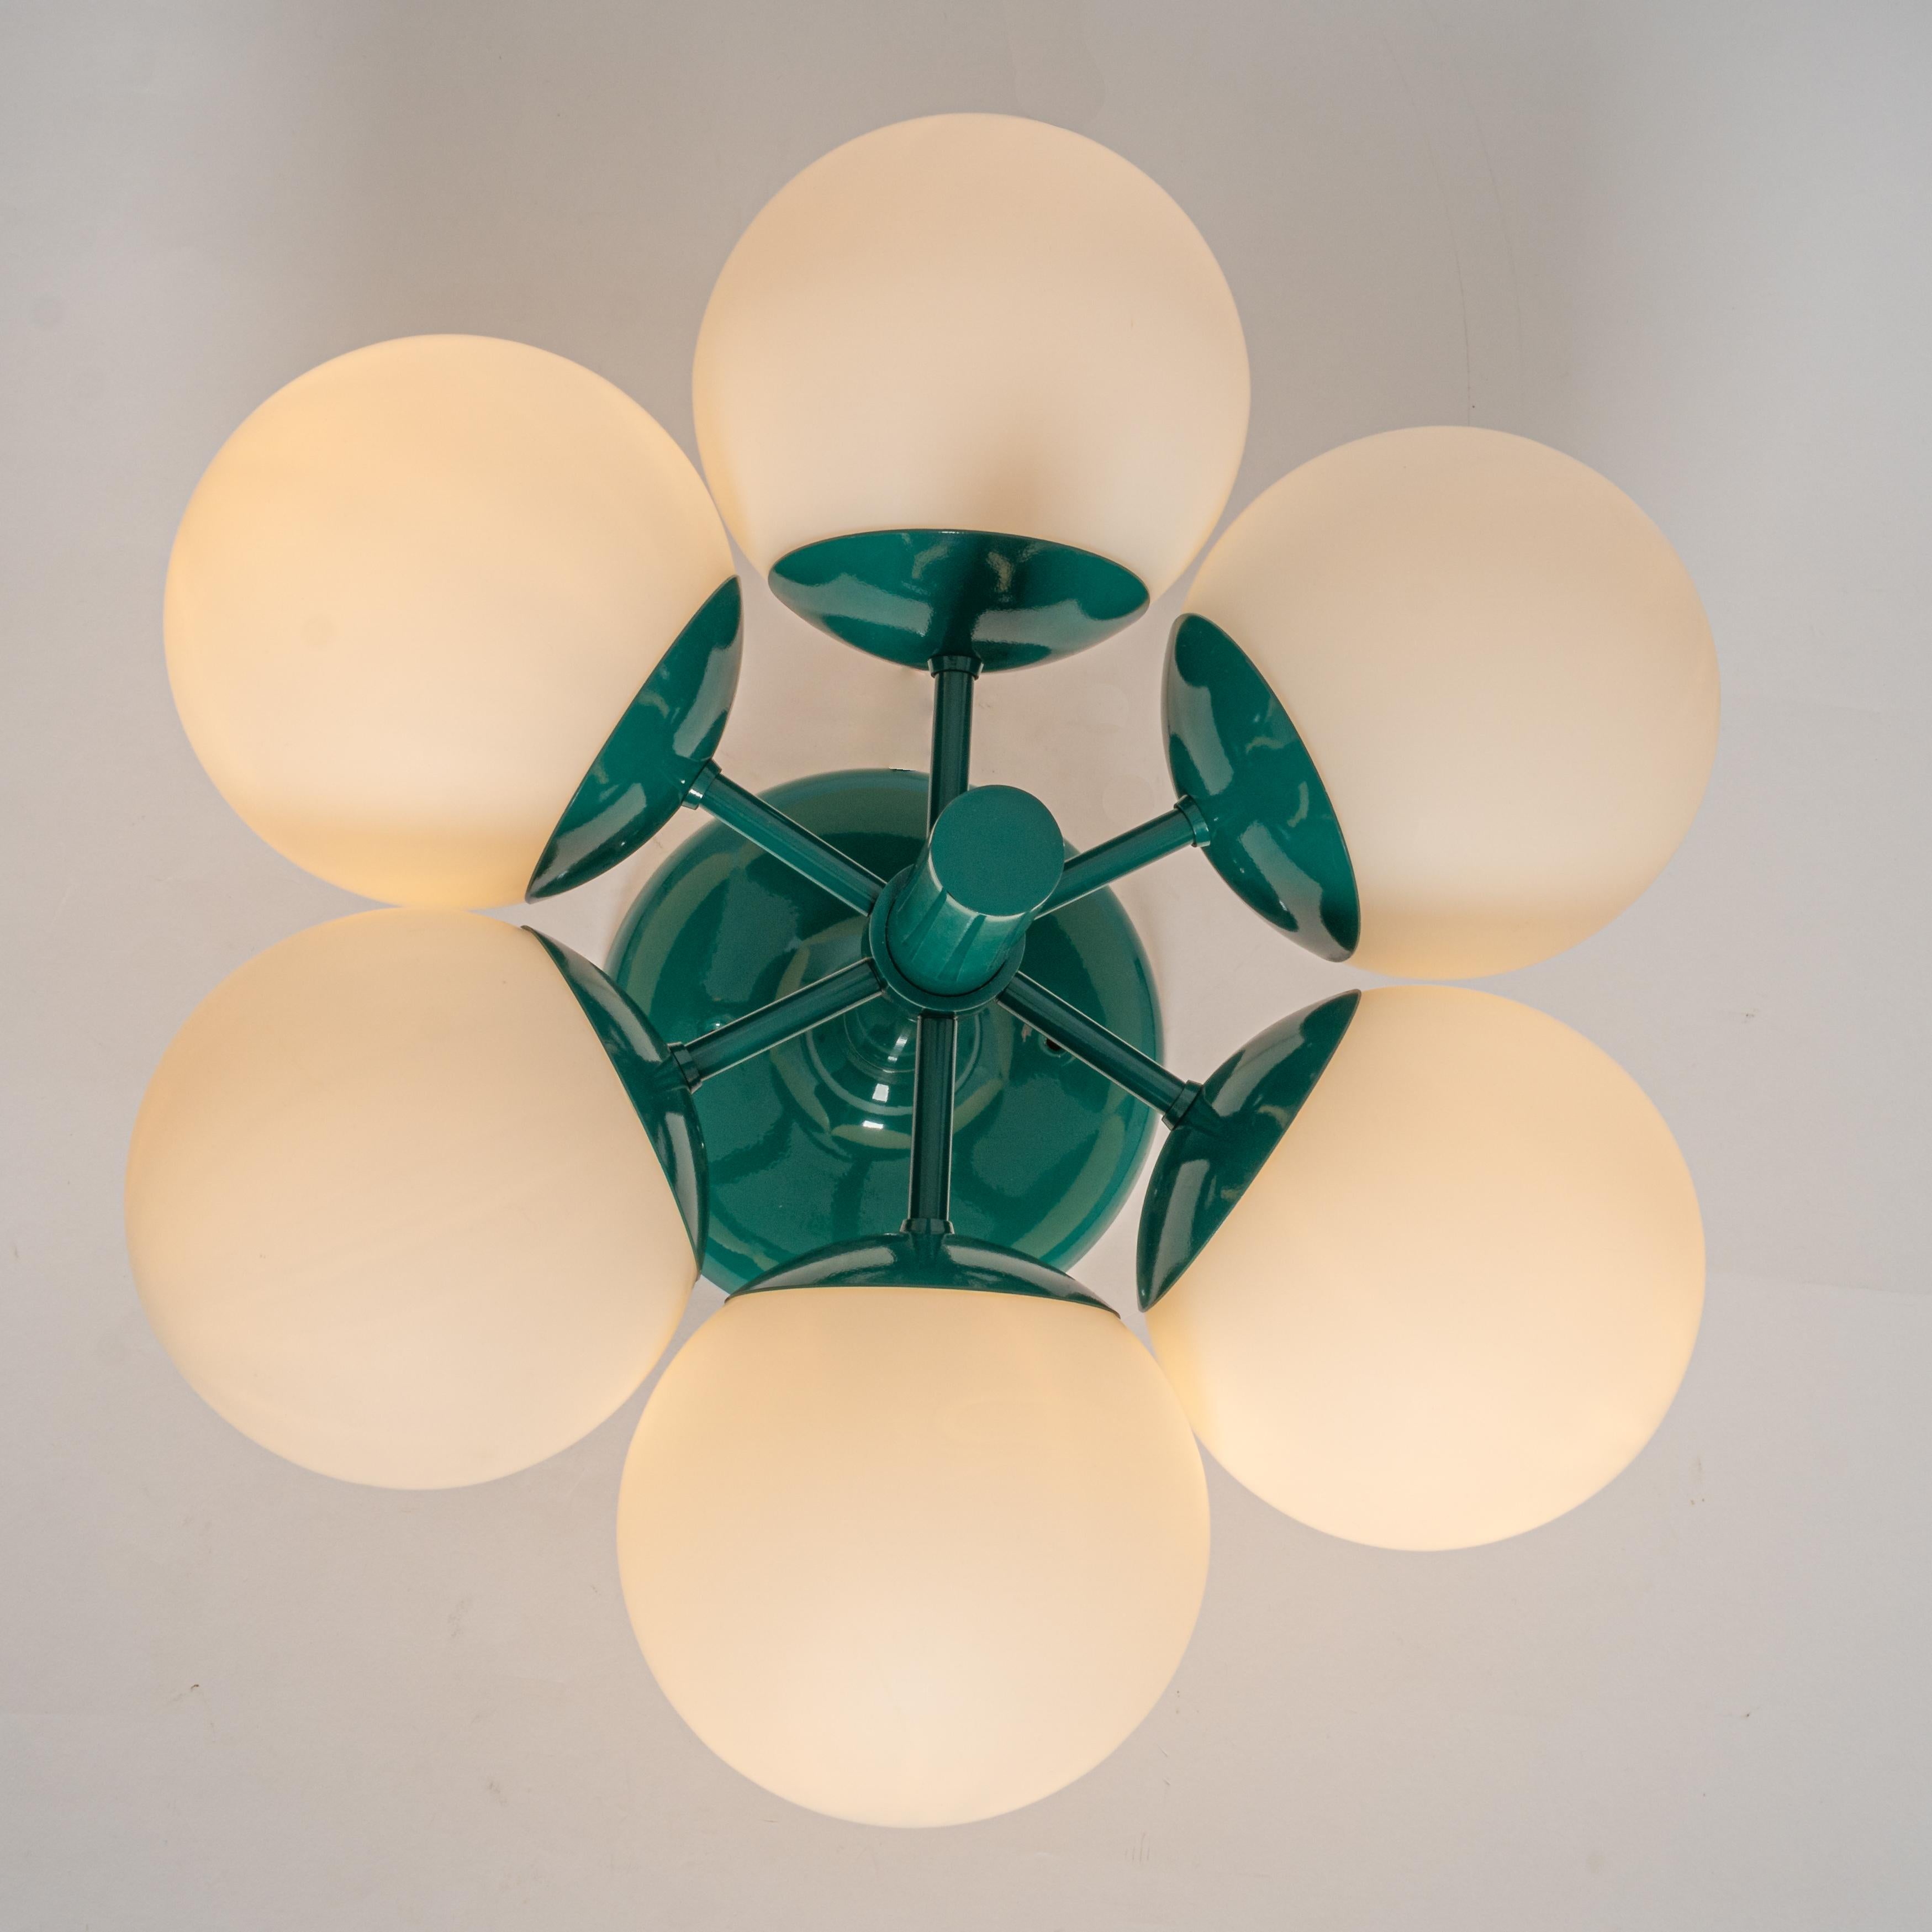 Midcentury Orbital Ceiling /Wall Lamp in Green by Kaiser, Germany, 1970s For Sale 4